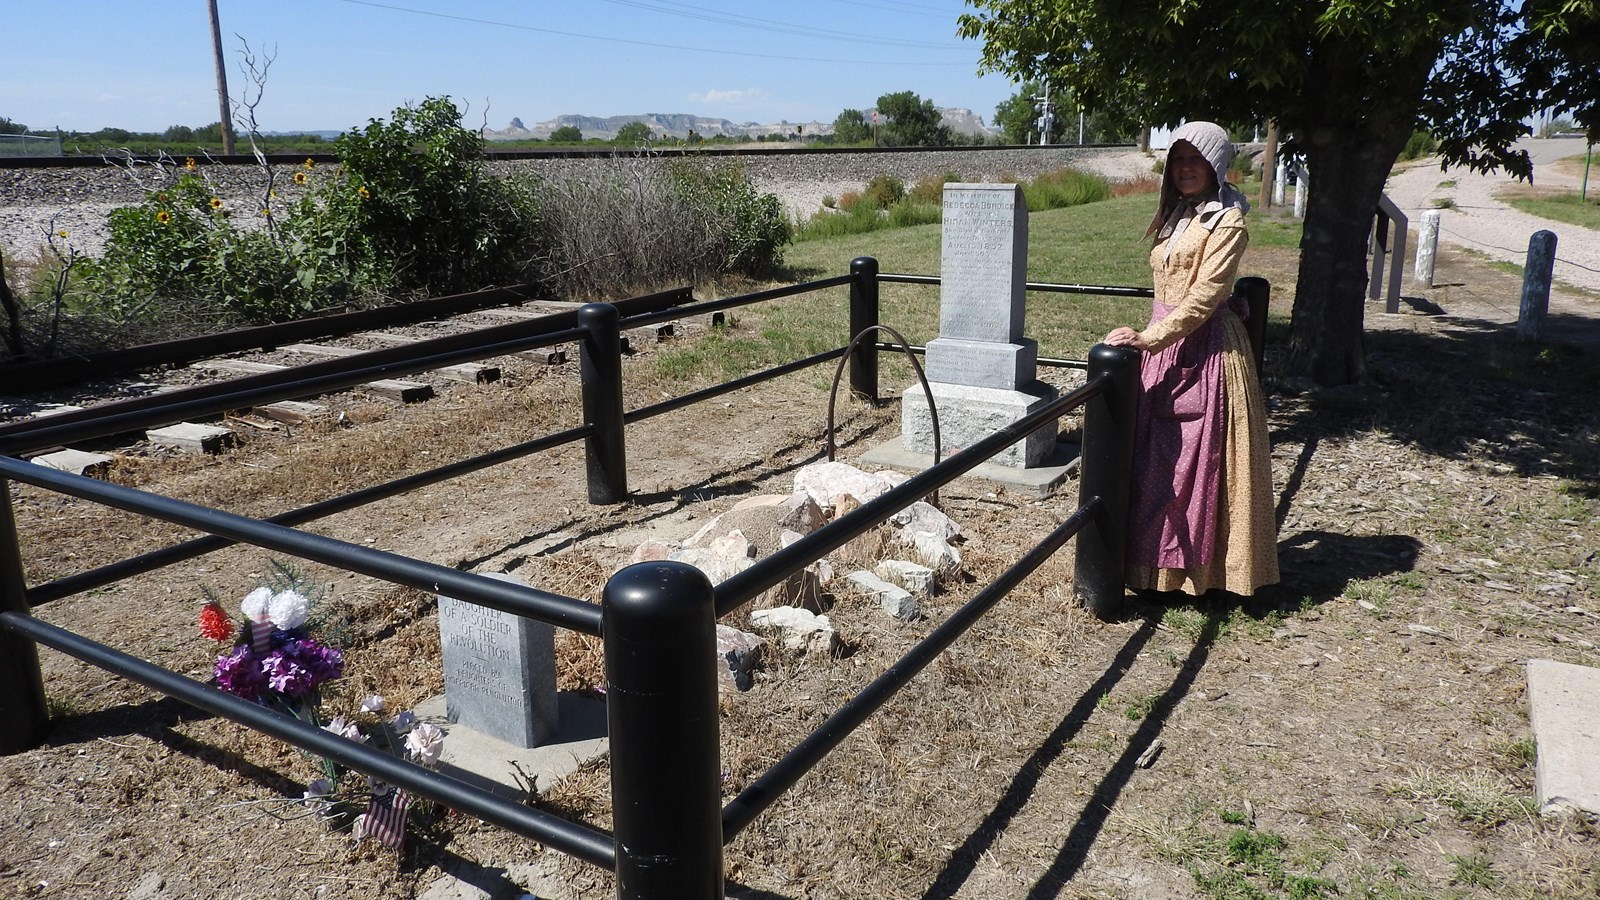 A woman dressed in emigrant costume is seen at the side of a grave.